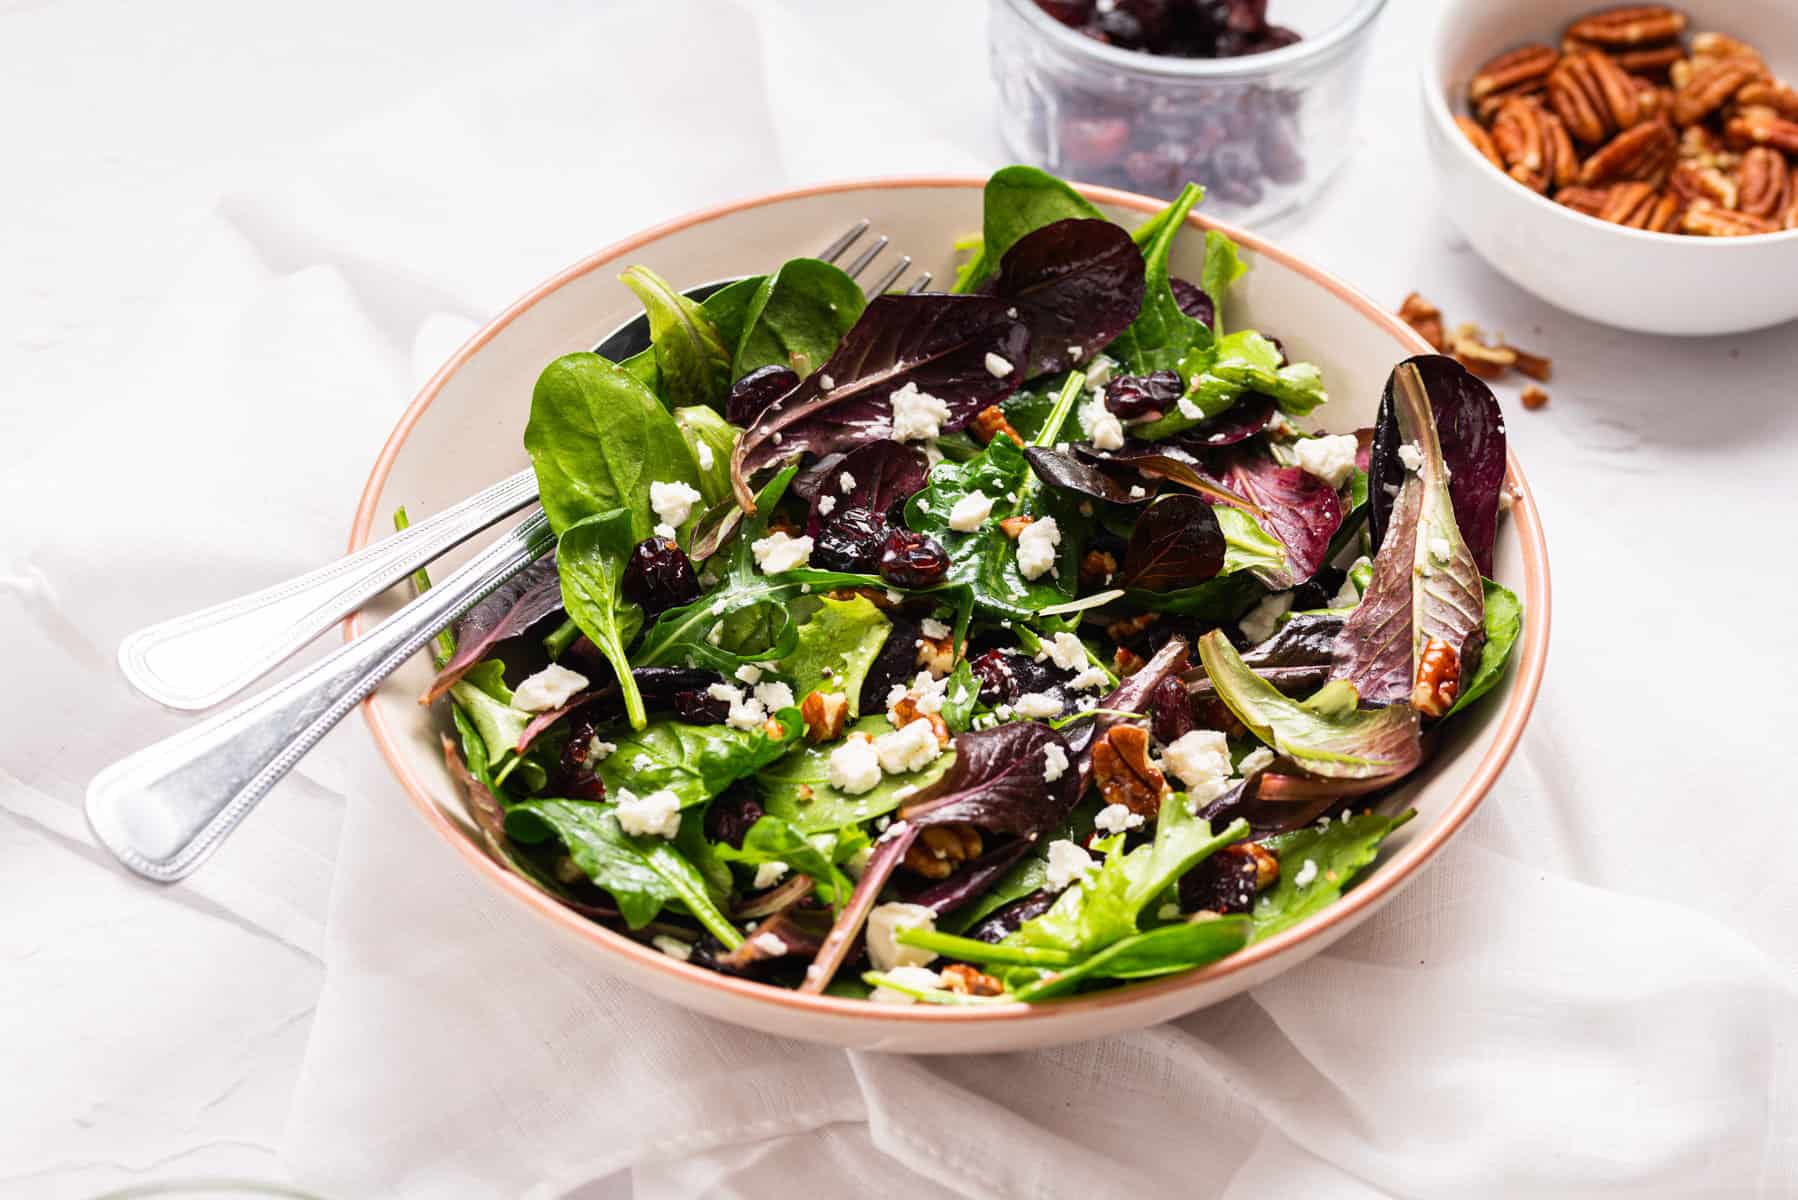 An image of cranberry salad with pecans served in a white salad bowl with a fork on the side.